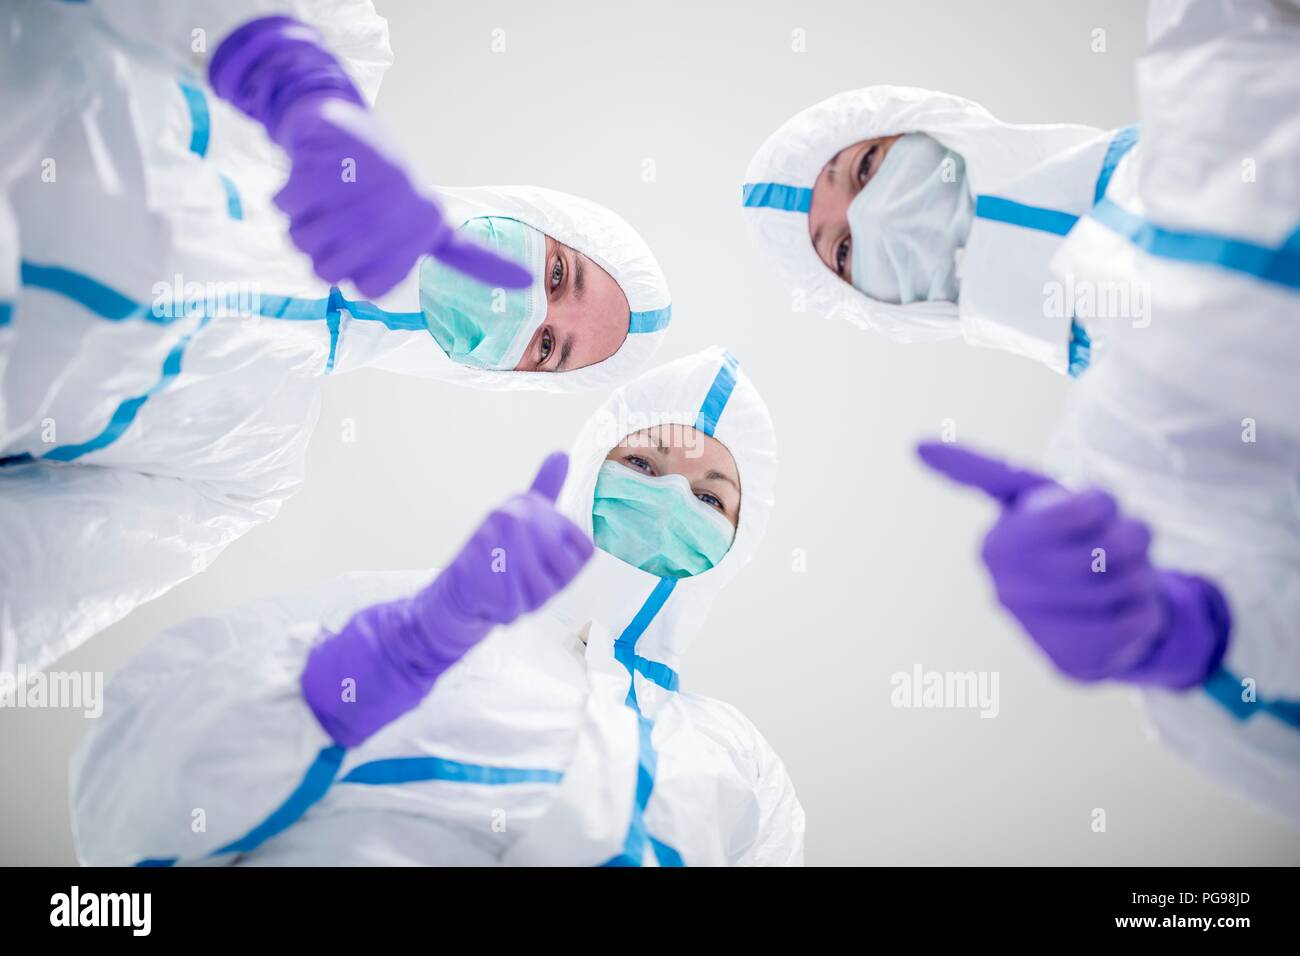 Lab technicians in a sterile environment giving the thumbs-up sign. Stock Photo